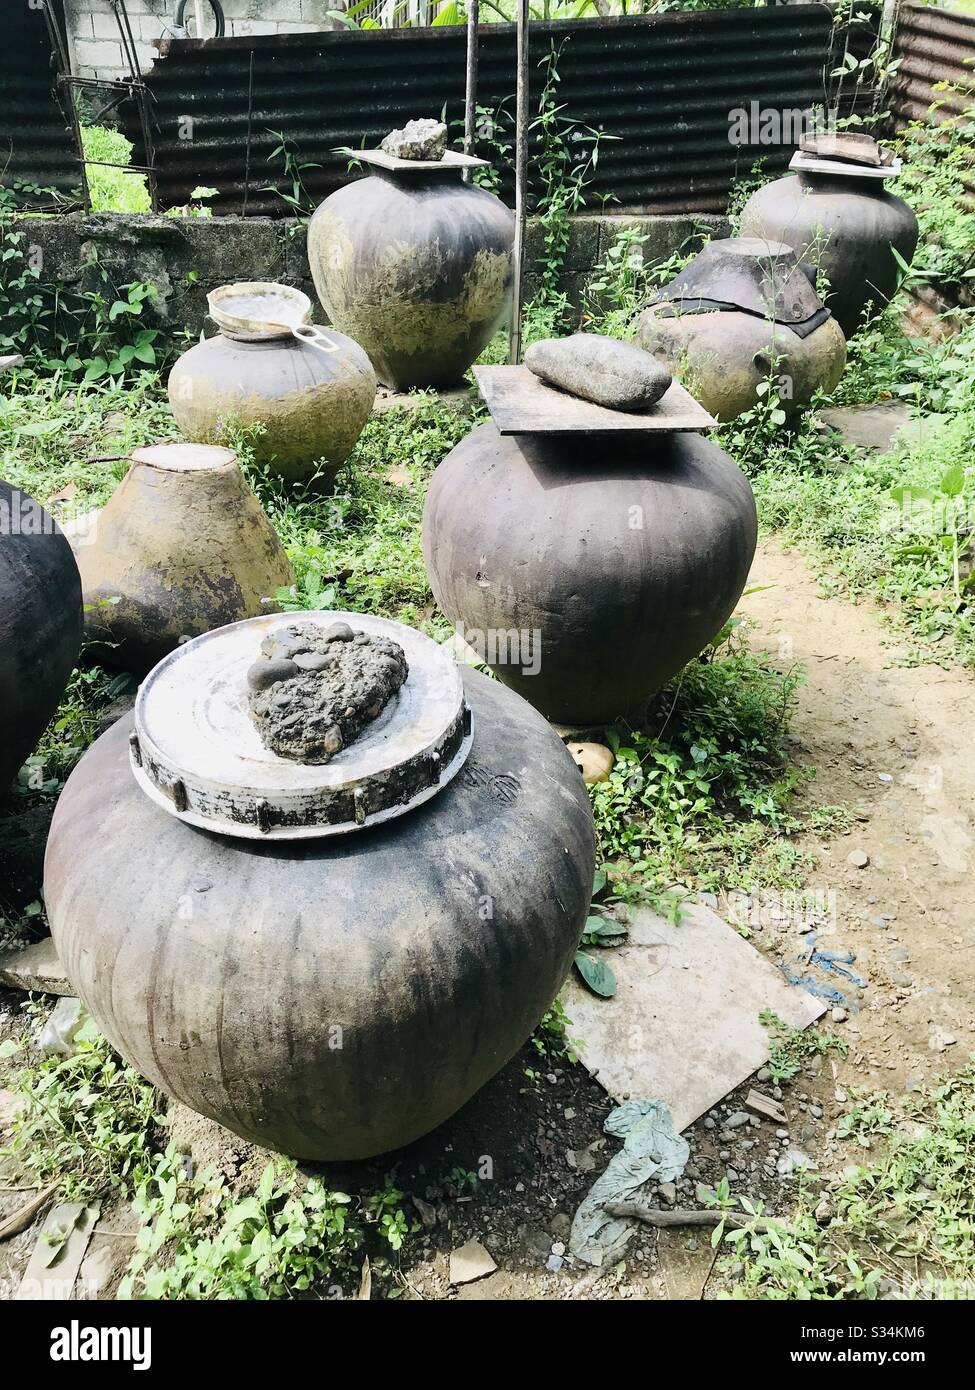 Traditional vinegar fermentation on terracotta pots.  A rare sighting of an heirloom process of making vinegar that will make one appreciate every drop. It has a potent acidity and earthy notes. Stock Photo